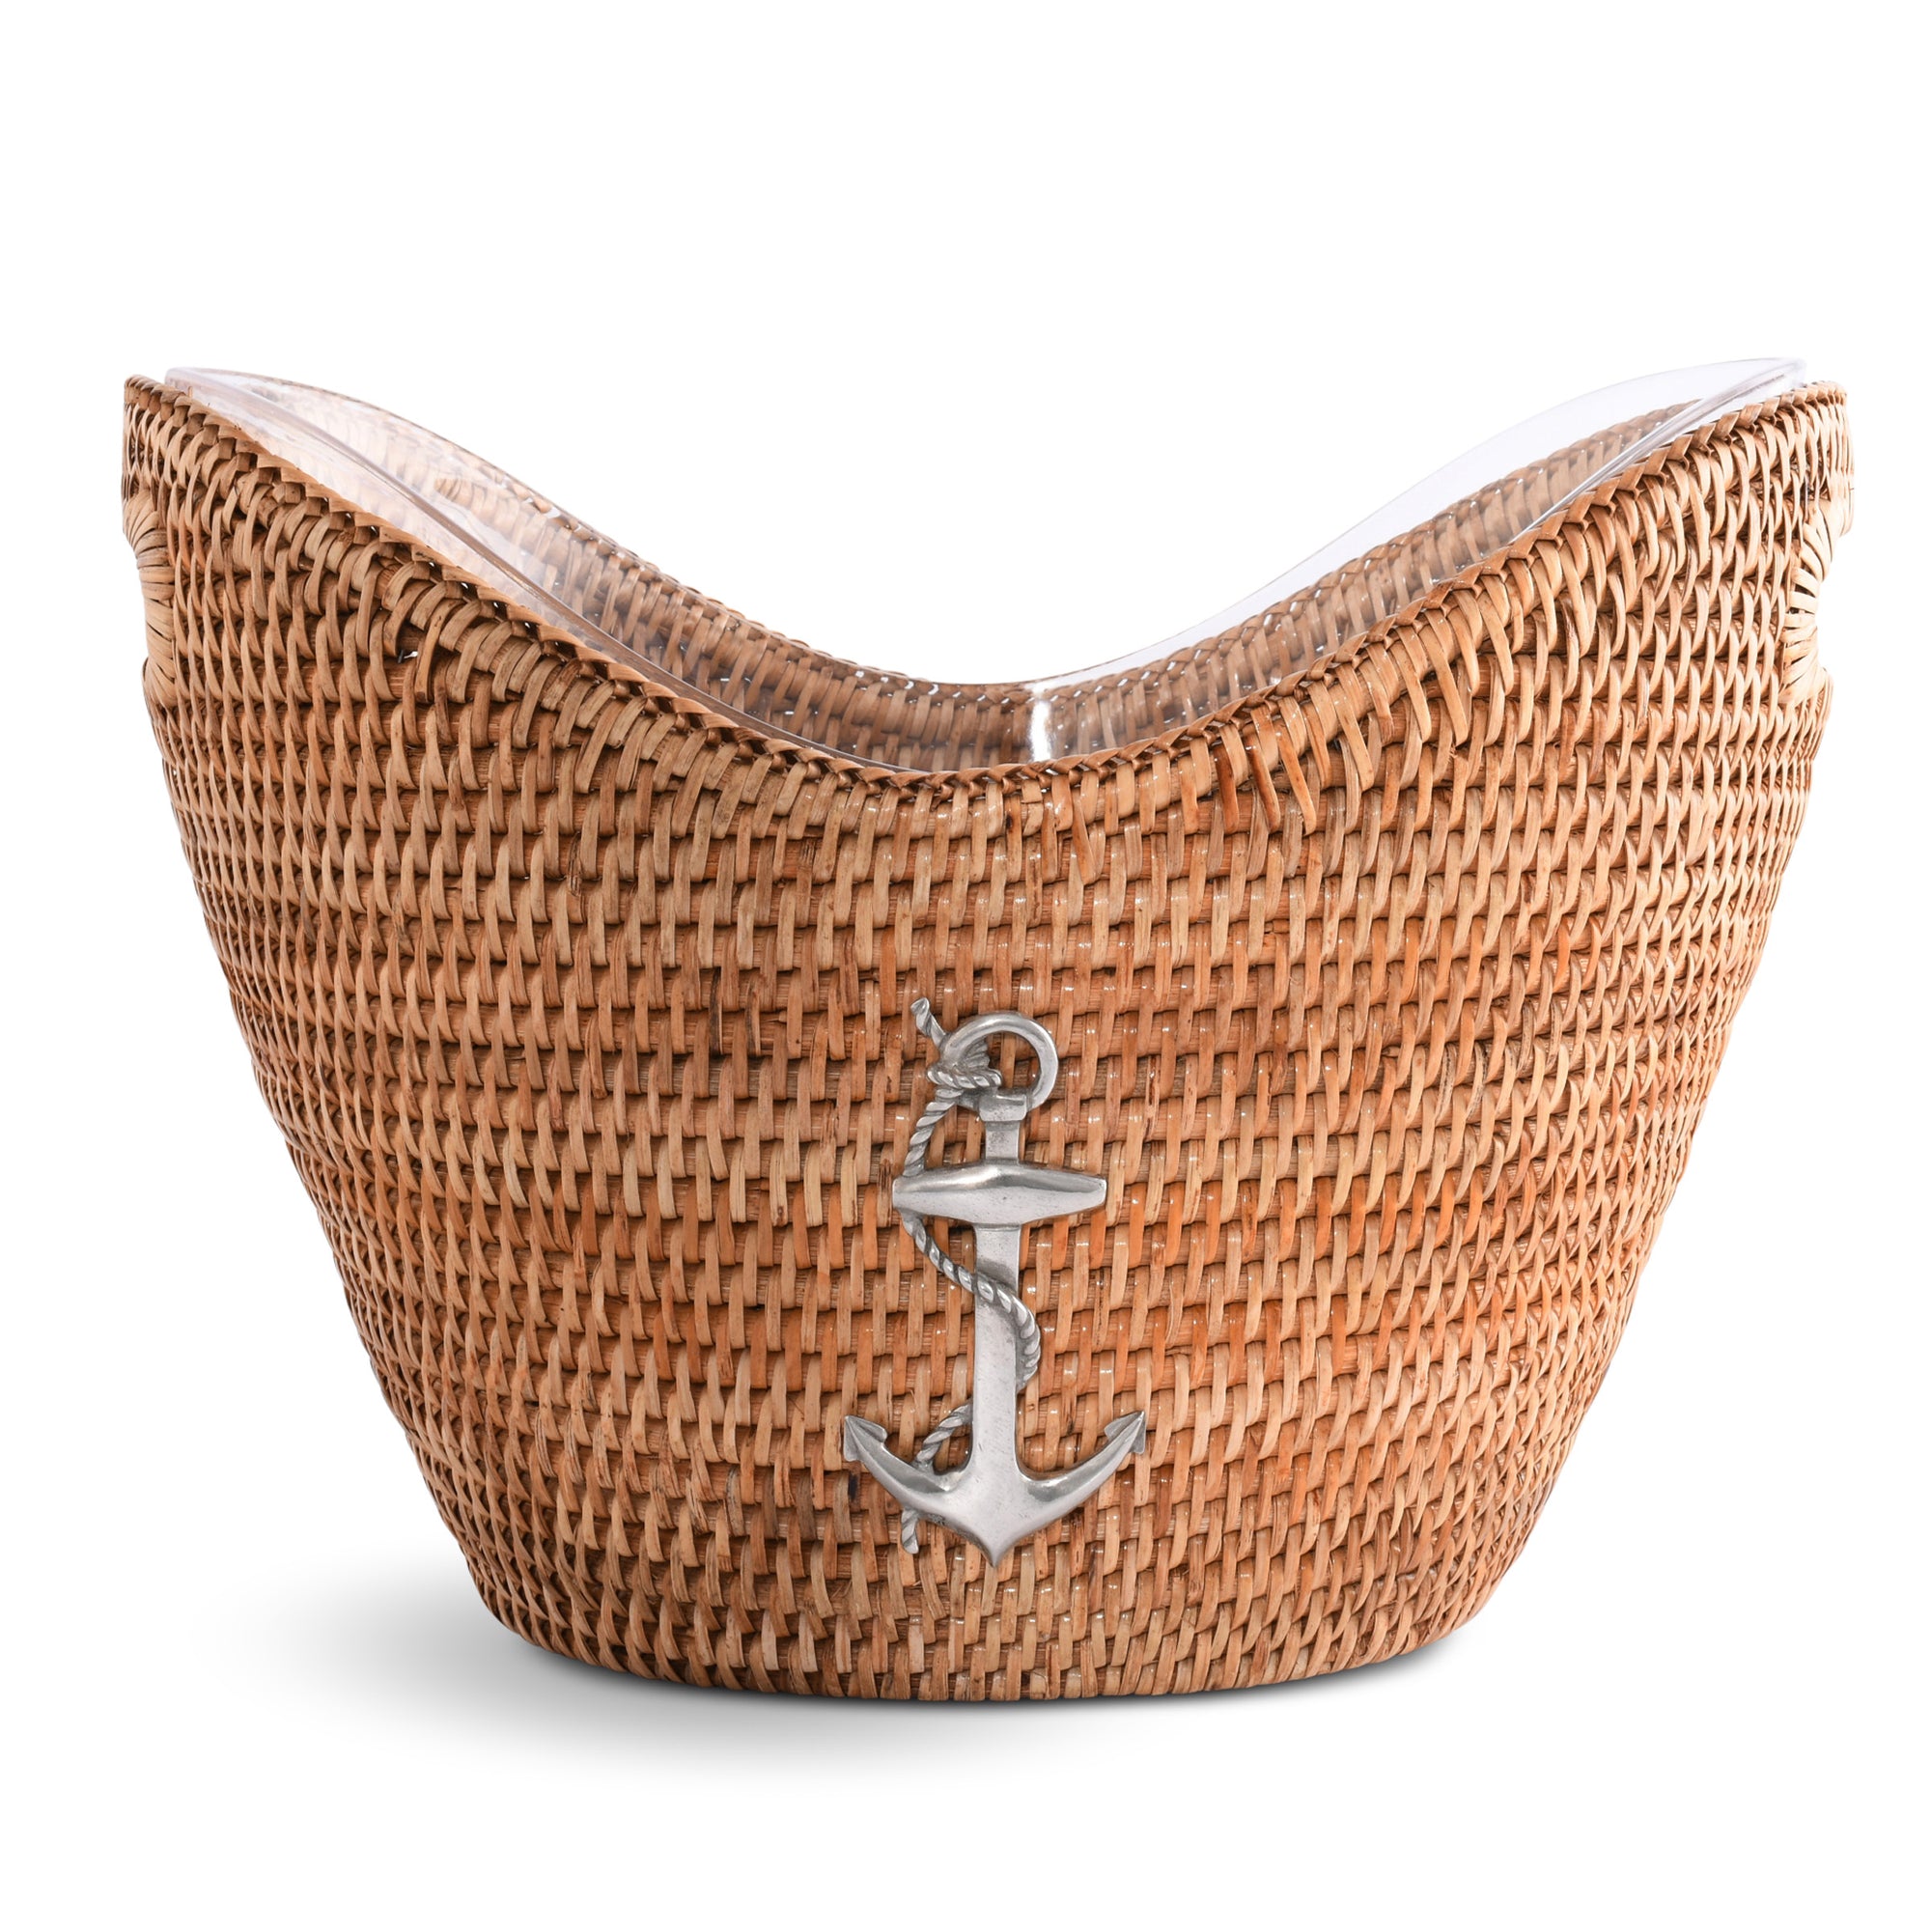 Vagabond House Anchor Hand Woven Wicker Rattan Champagne / Ice Tub Product Image